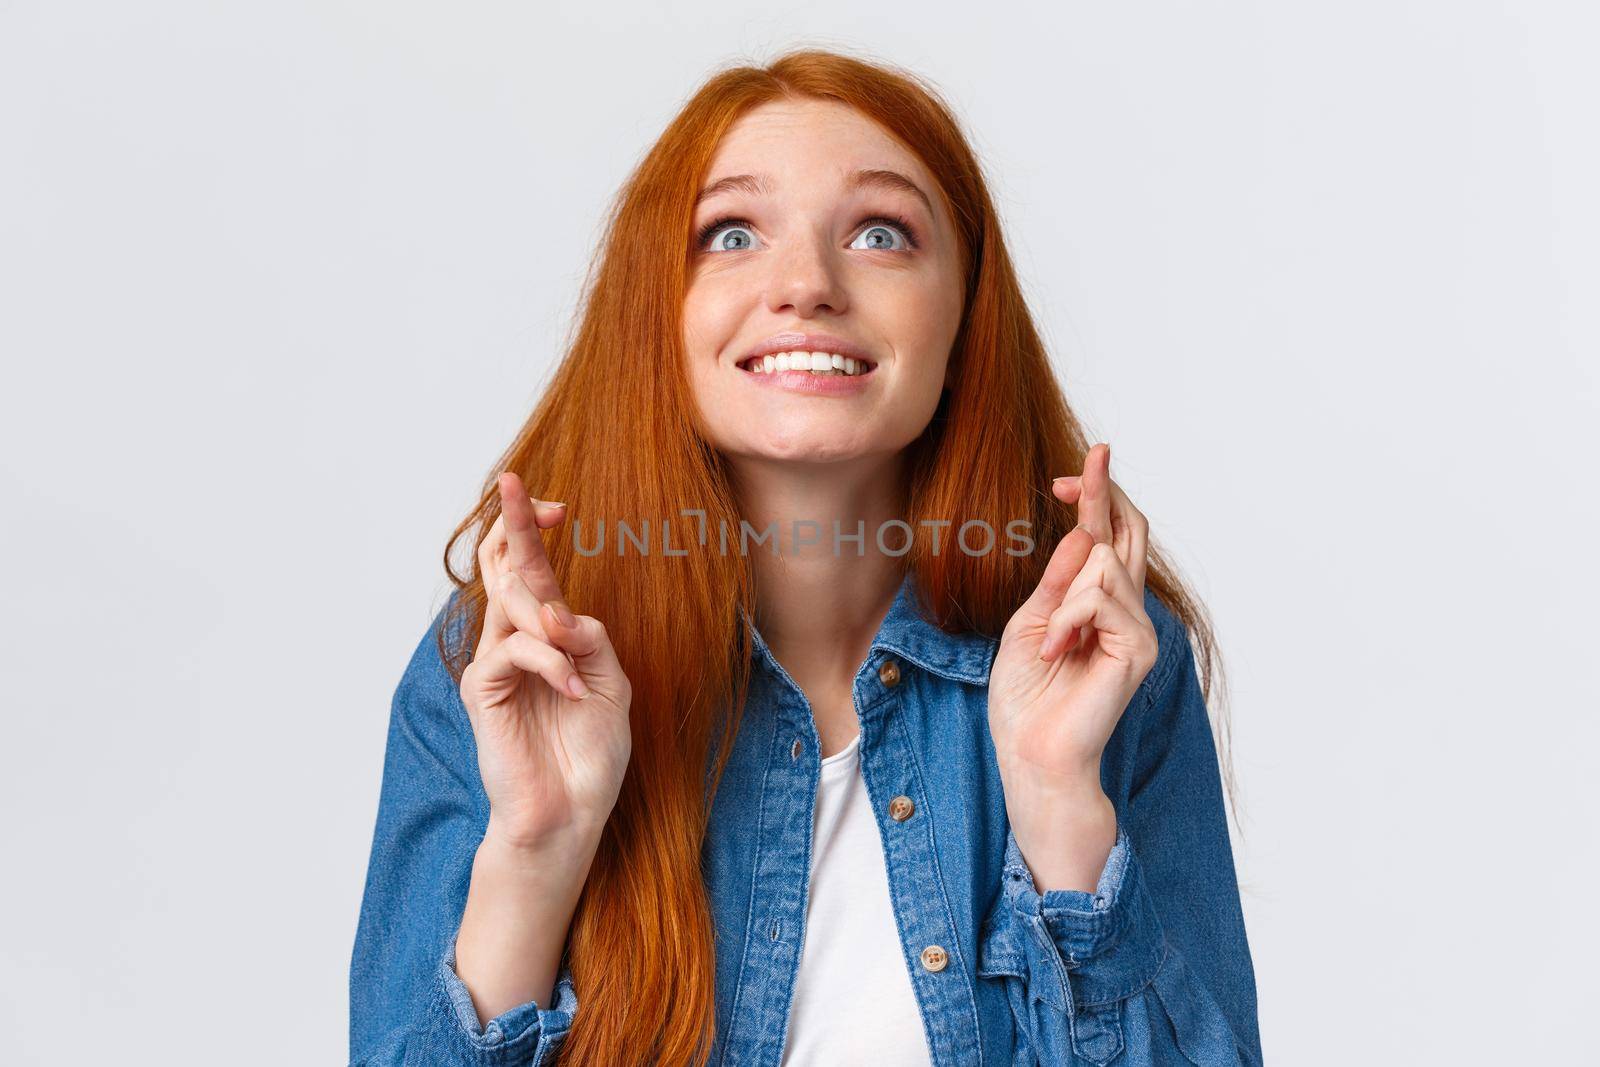 Excited and hopeful, optimistic cute redhead girl want dream come true, desire something, aspire achieve success good results, smiling looking up sky and making wish with fingers crossed good luck.